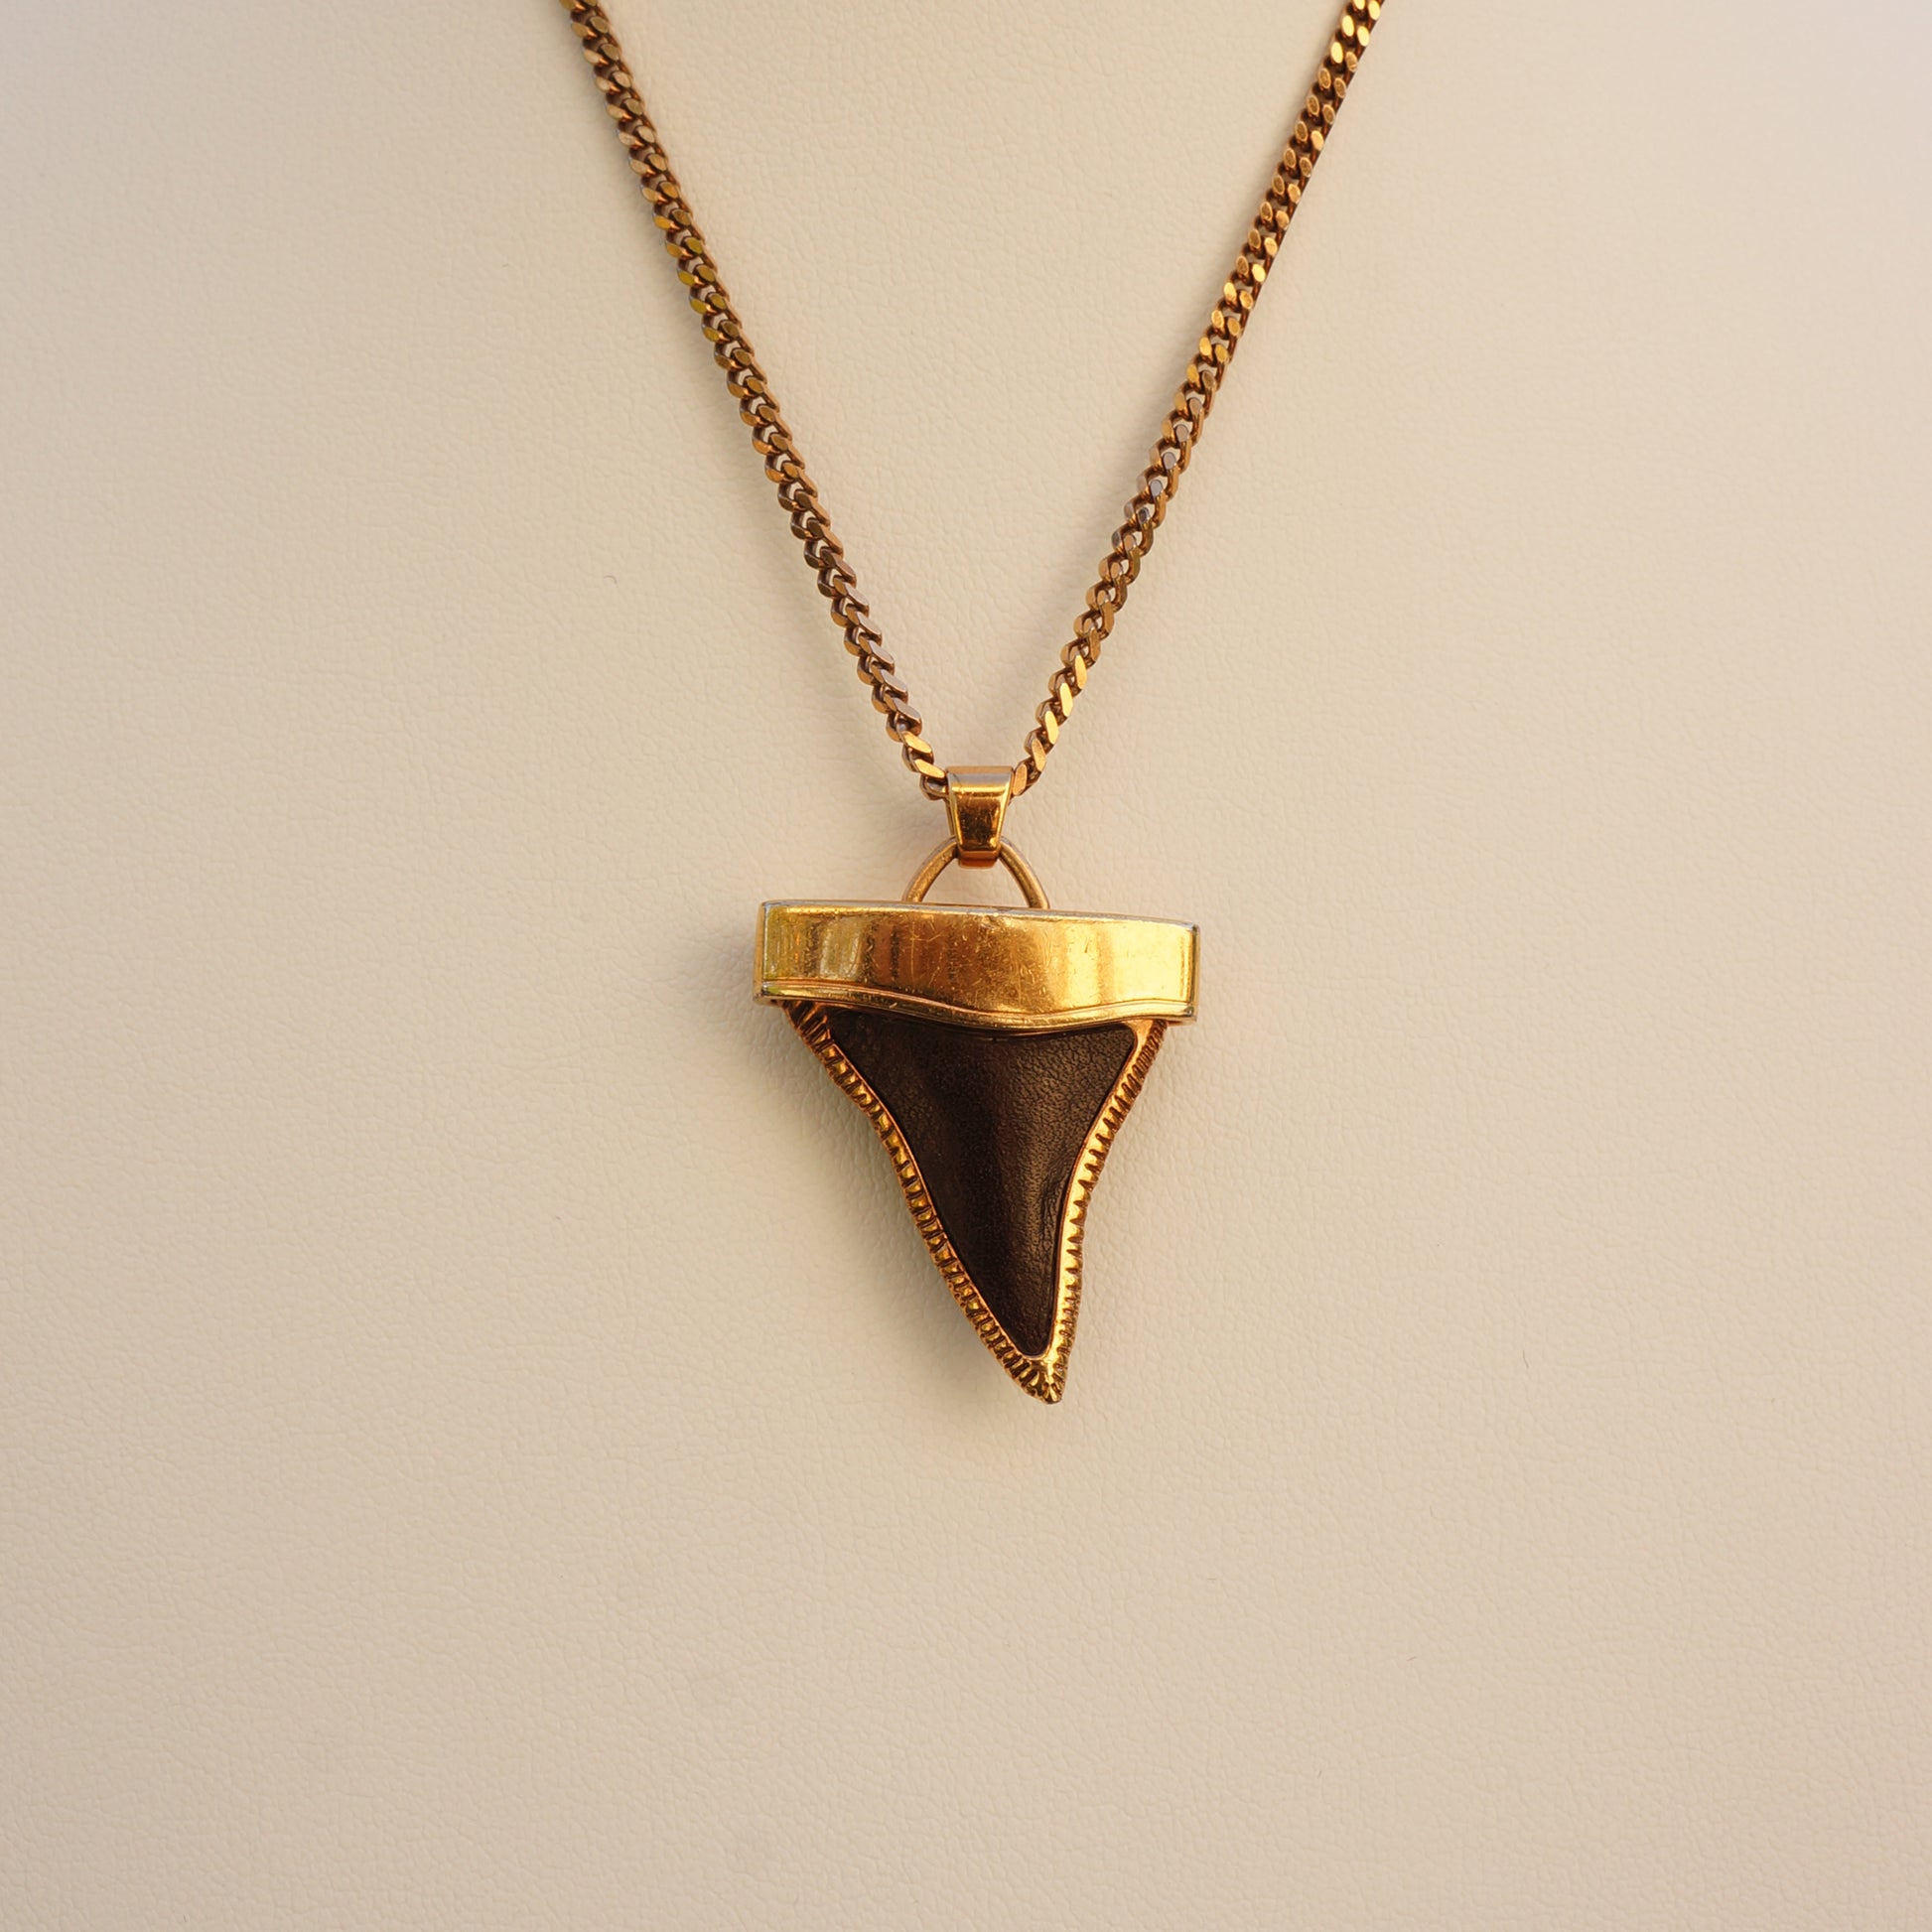 GIVENCHY SMALL SHARK TOOTH DOUBLE STRAND NECKLACE - leefluxury.com